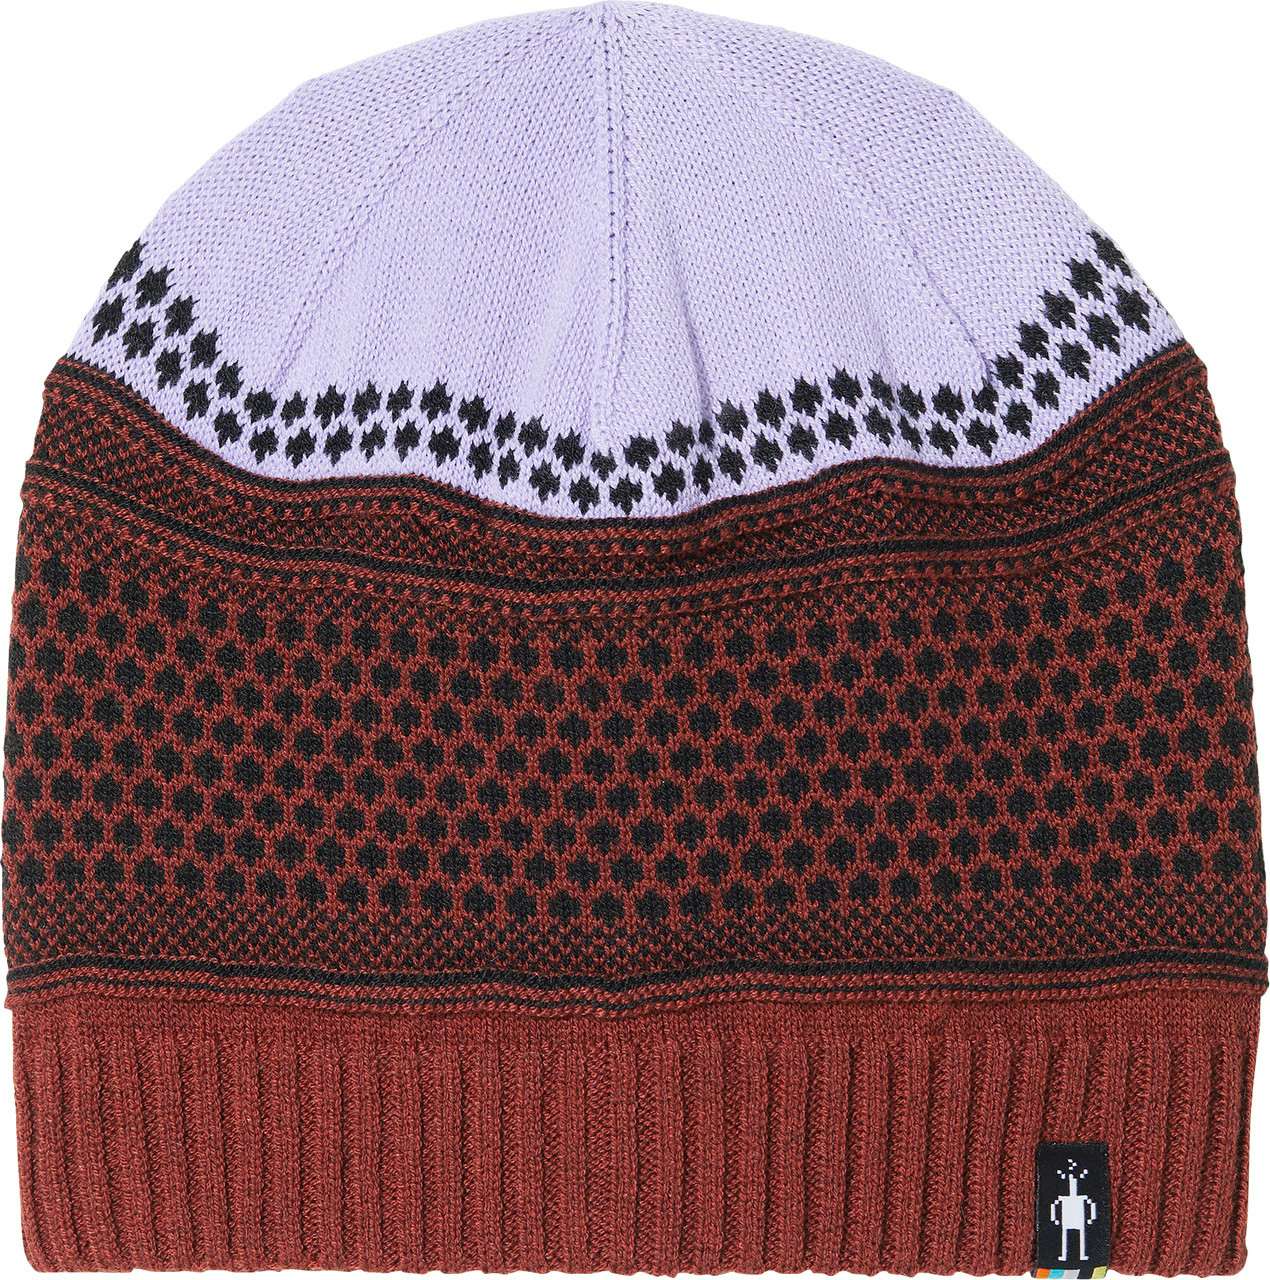 Tuque Popcorn Cable Violet ultra